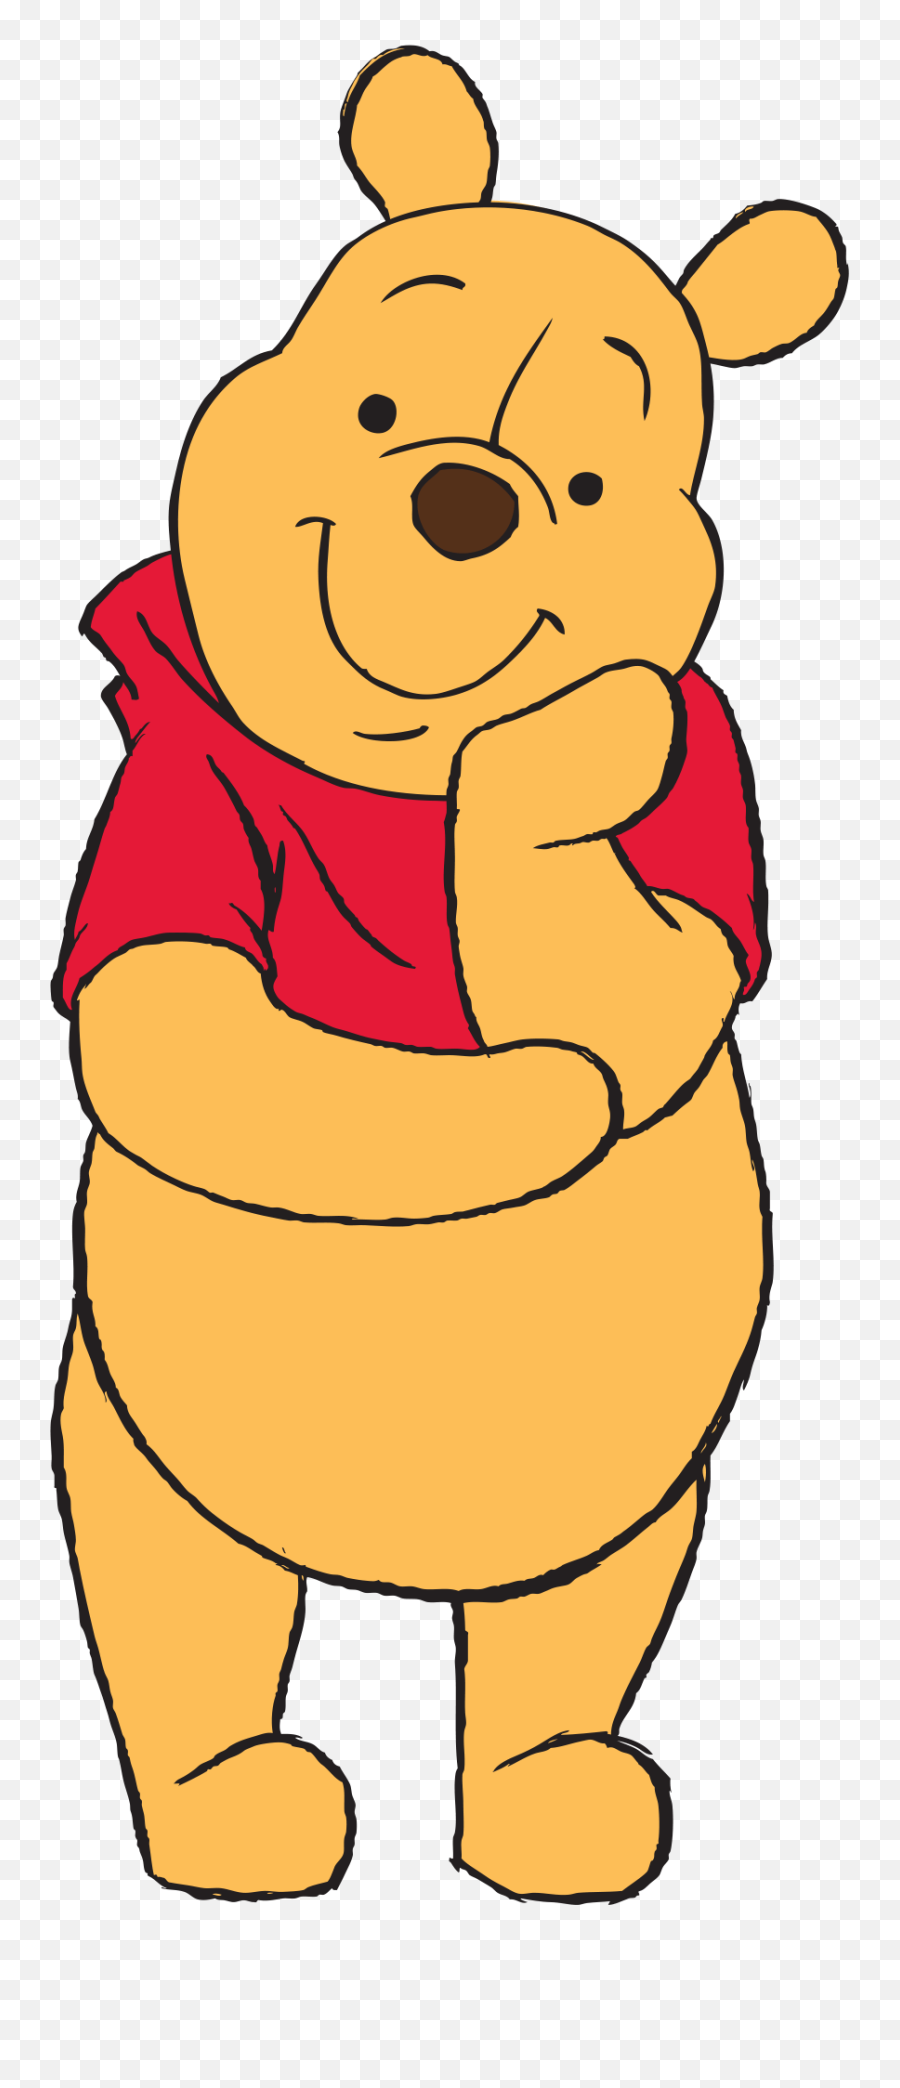 Winnie Pooh Png Image - Disney Characters Winnie The Pooh,Pooh Png - free  transparent png images 